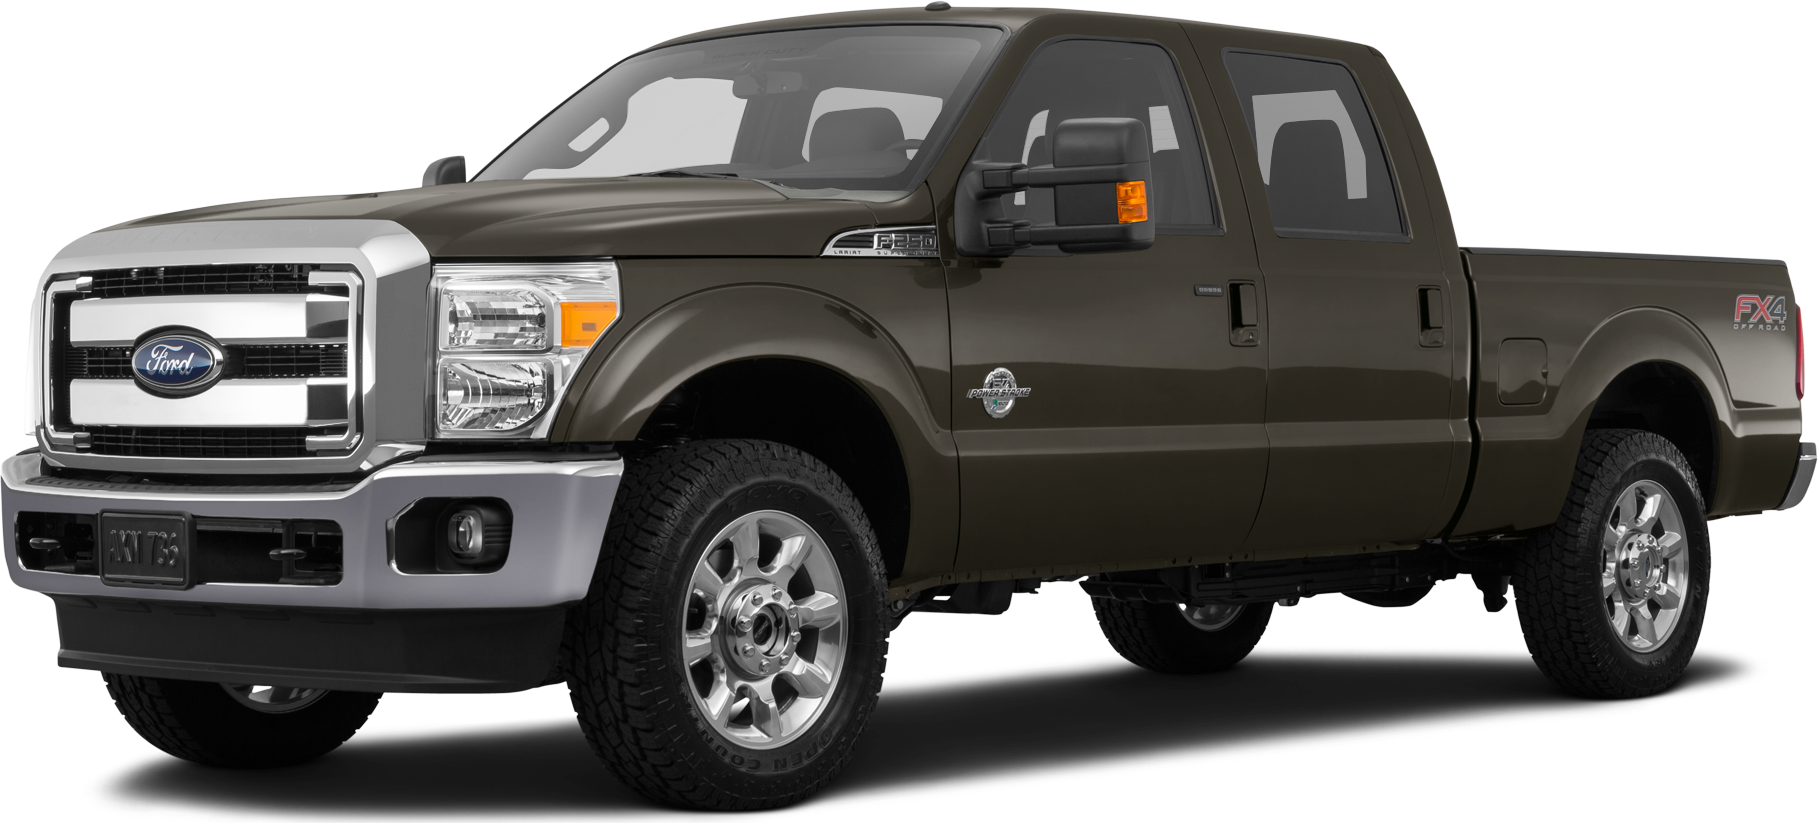 2016 Ford F250 Super Duty Crew Cab Price, Value, Ratings & Reviews